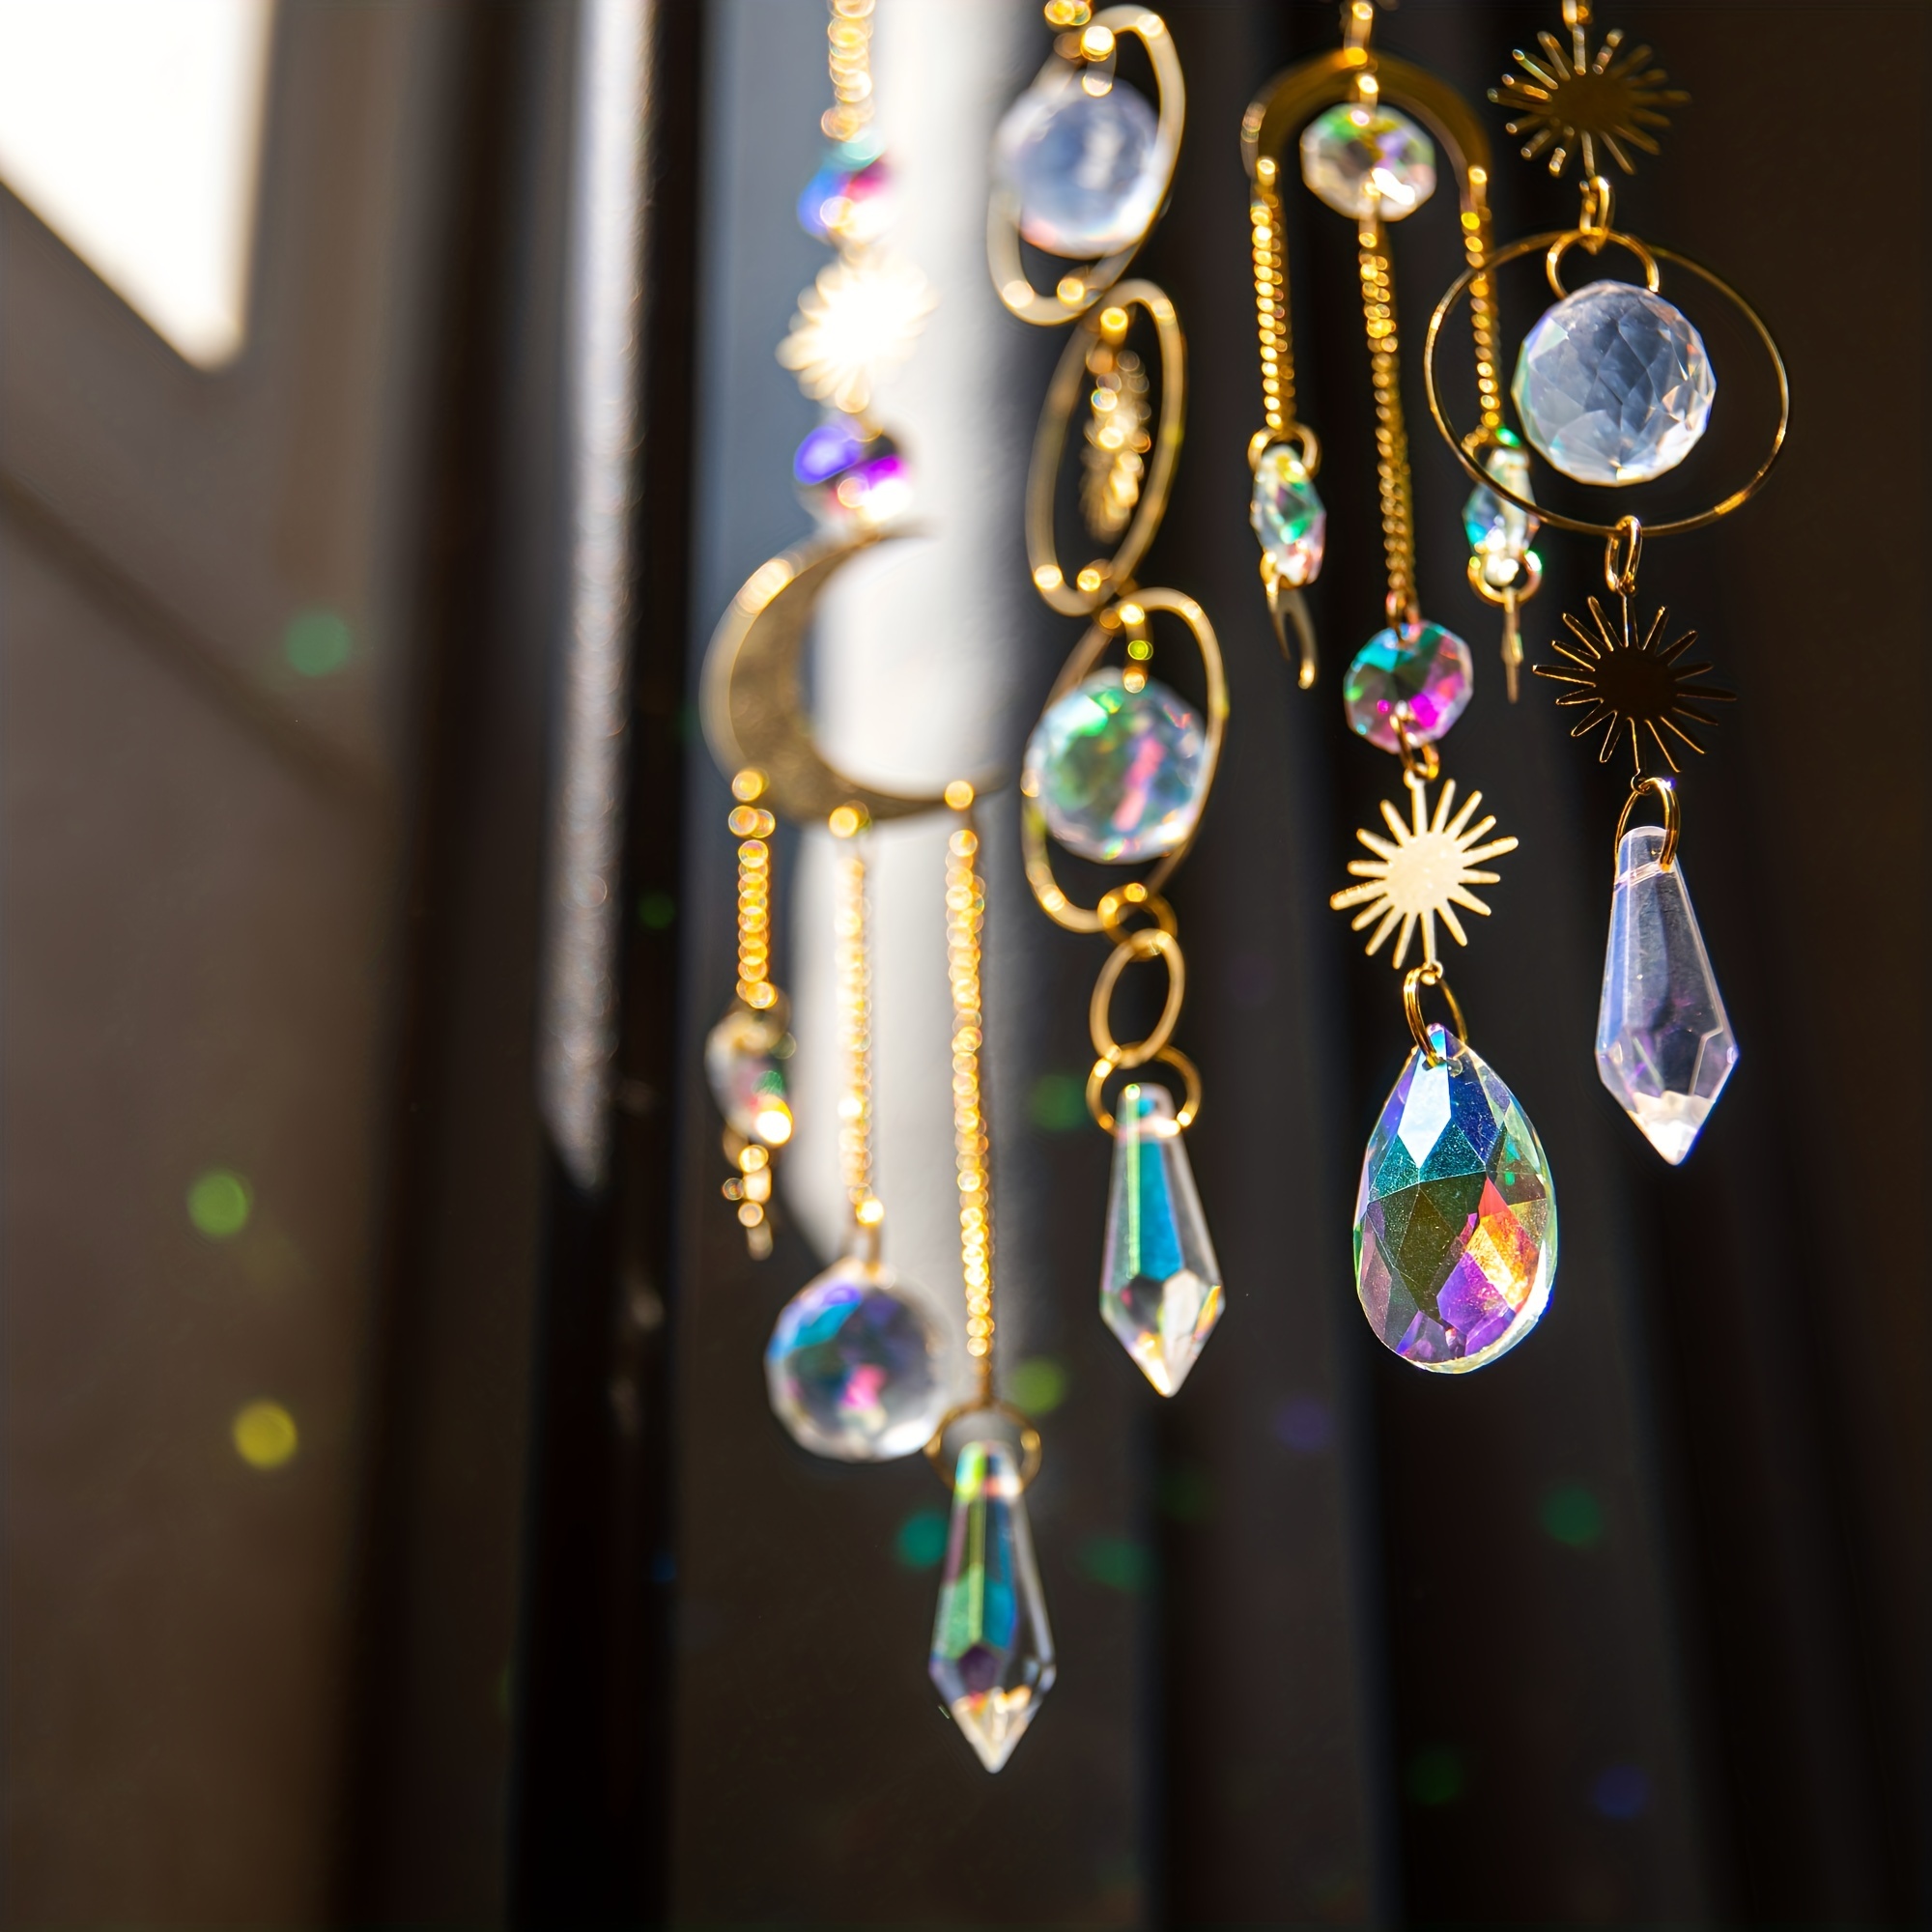 Hanging Crystals Suncatcher Sun Catcher with Chain Pendant Moon Ornament  Crystal Balls for Window Home Garden Christmas Day Party Wedding  Decoration, Silver 